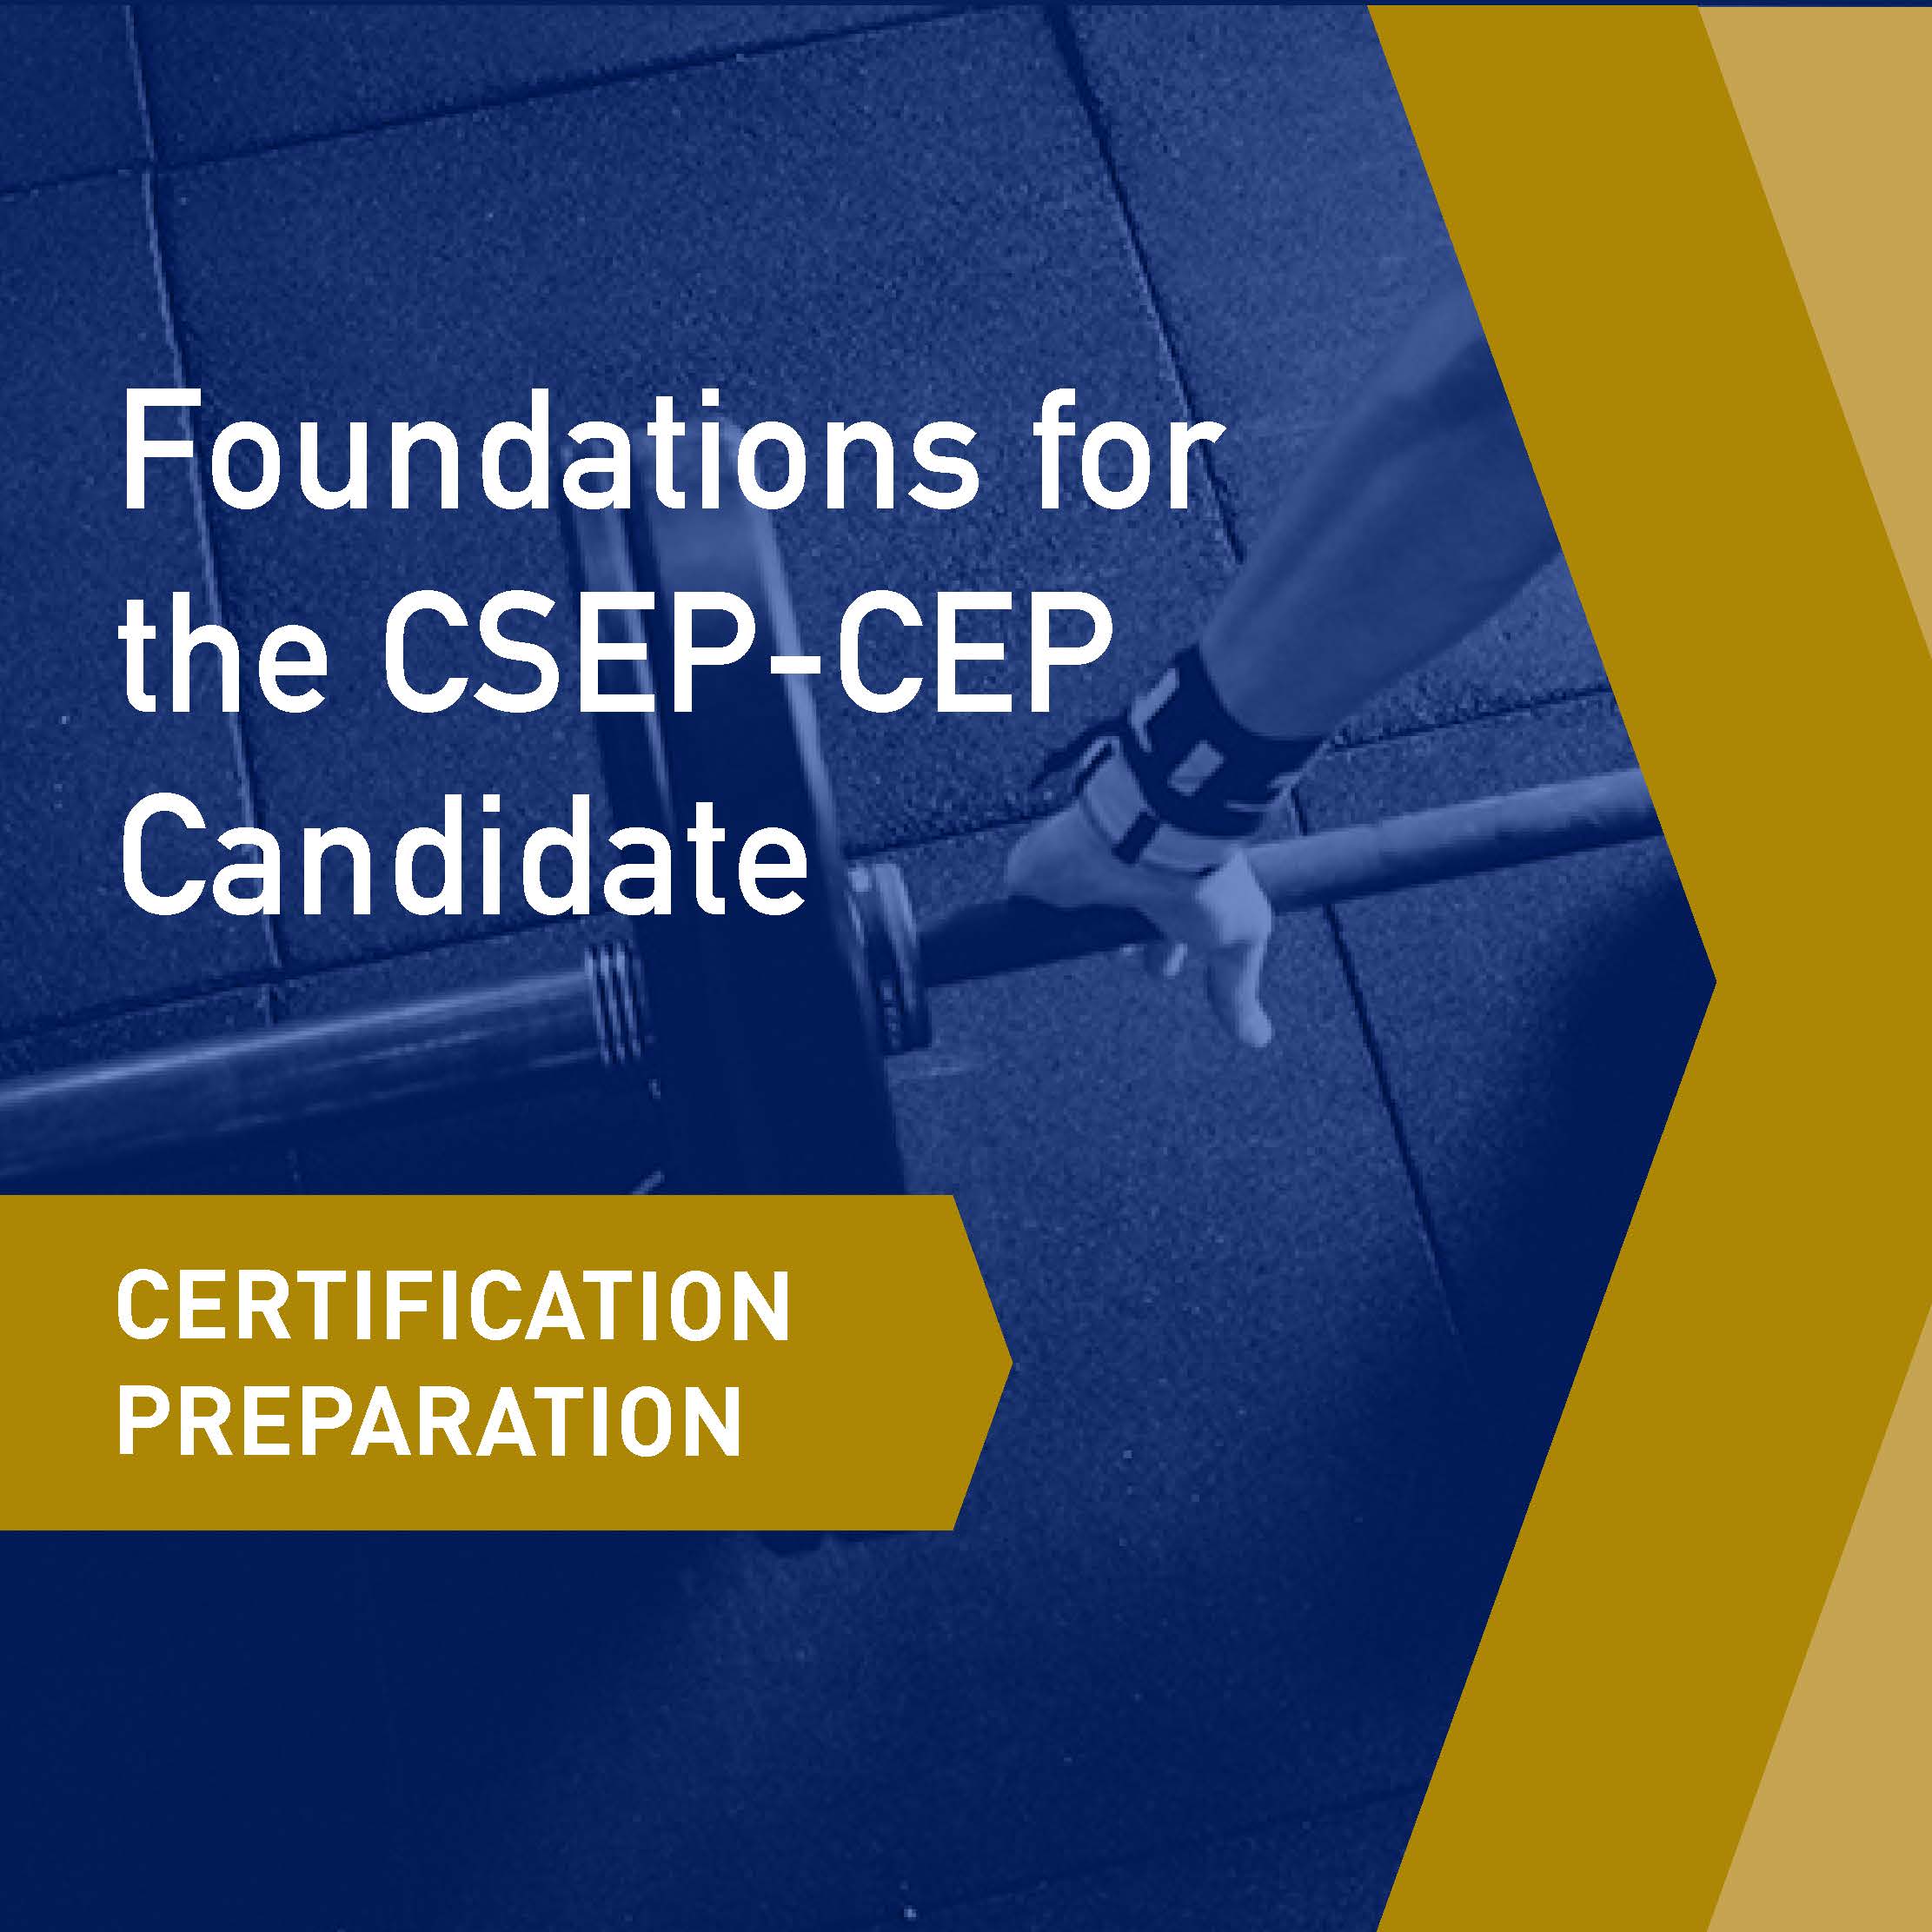 Certification Preparation: Foundations for the CSEP-CEP Candidate